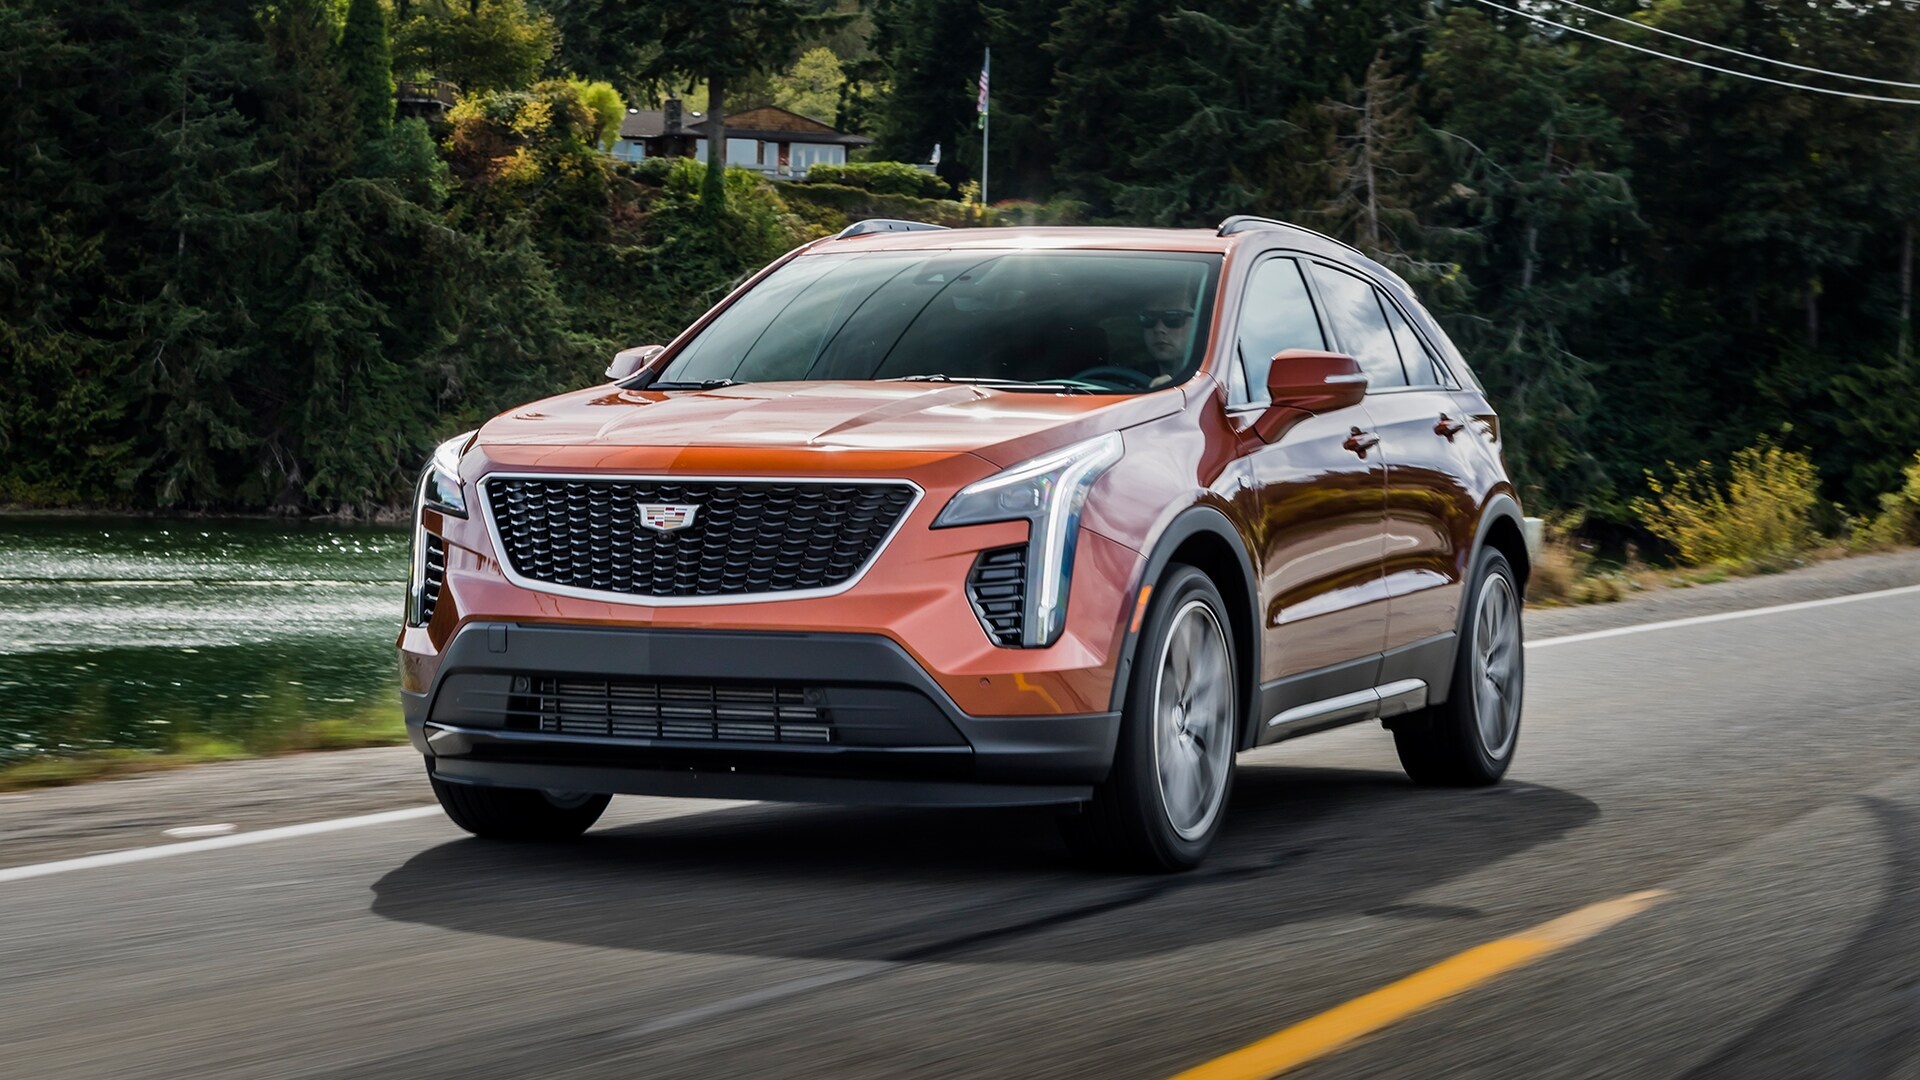 Cadillac XT4, First drive experience, Luxury crossover, Premium features, 1920x1080 Full HD Desktop